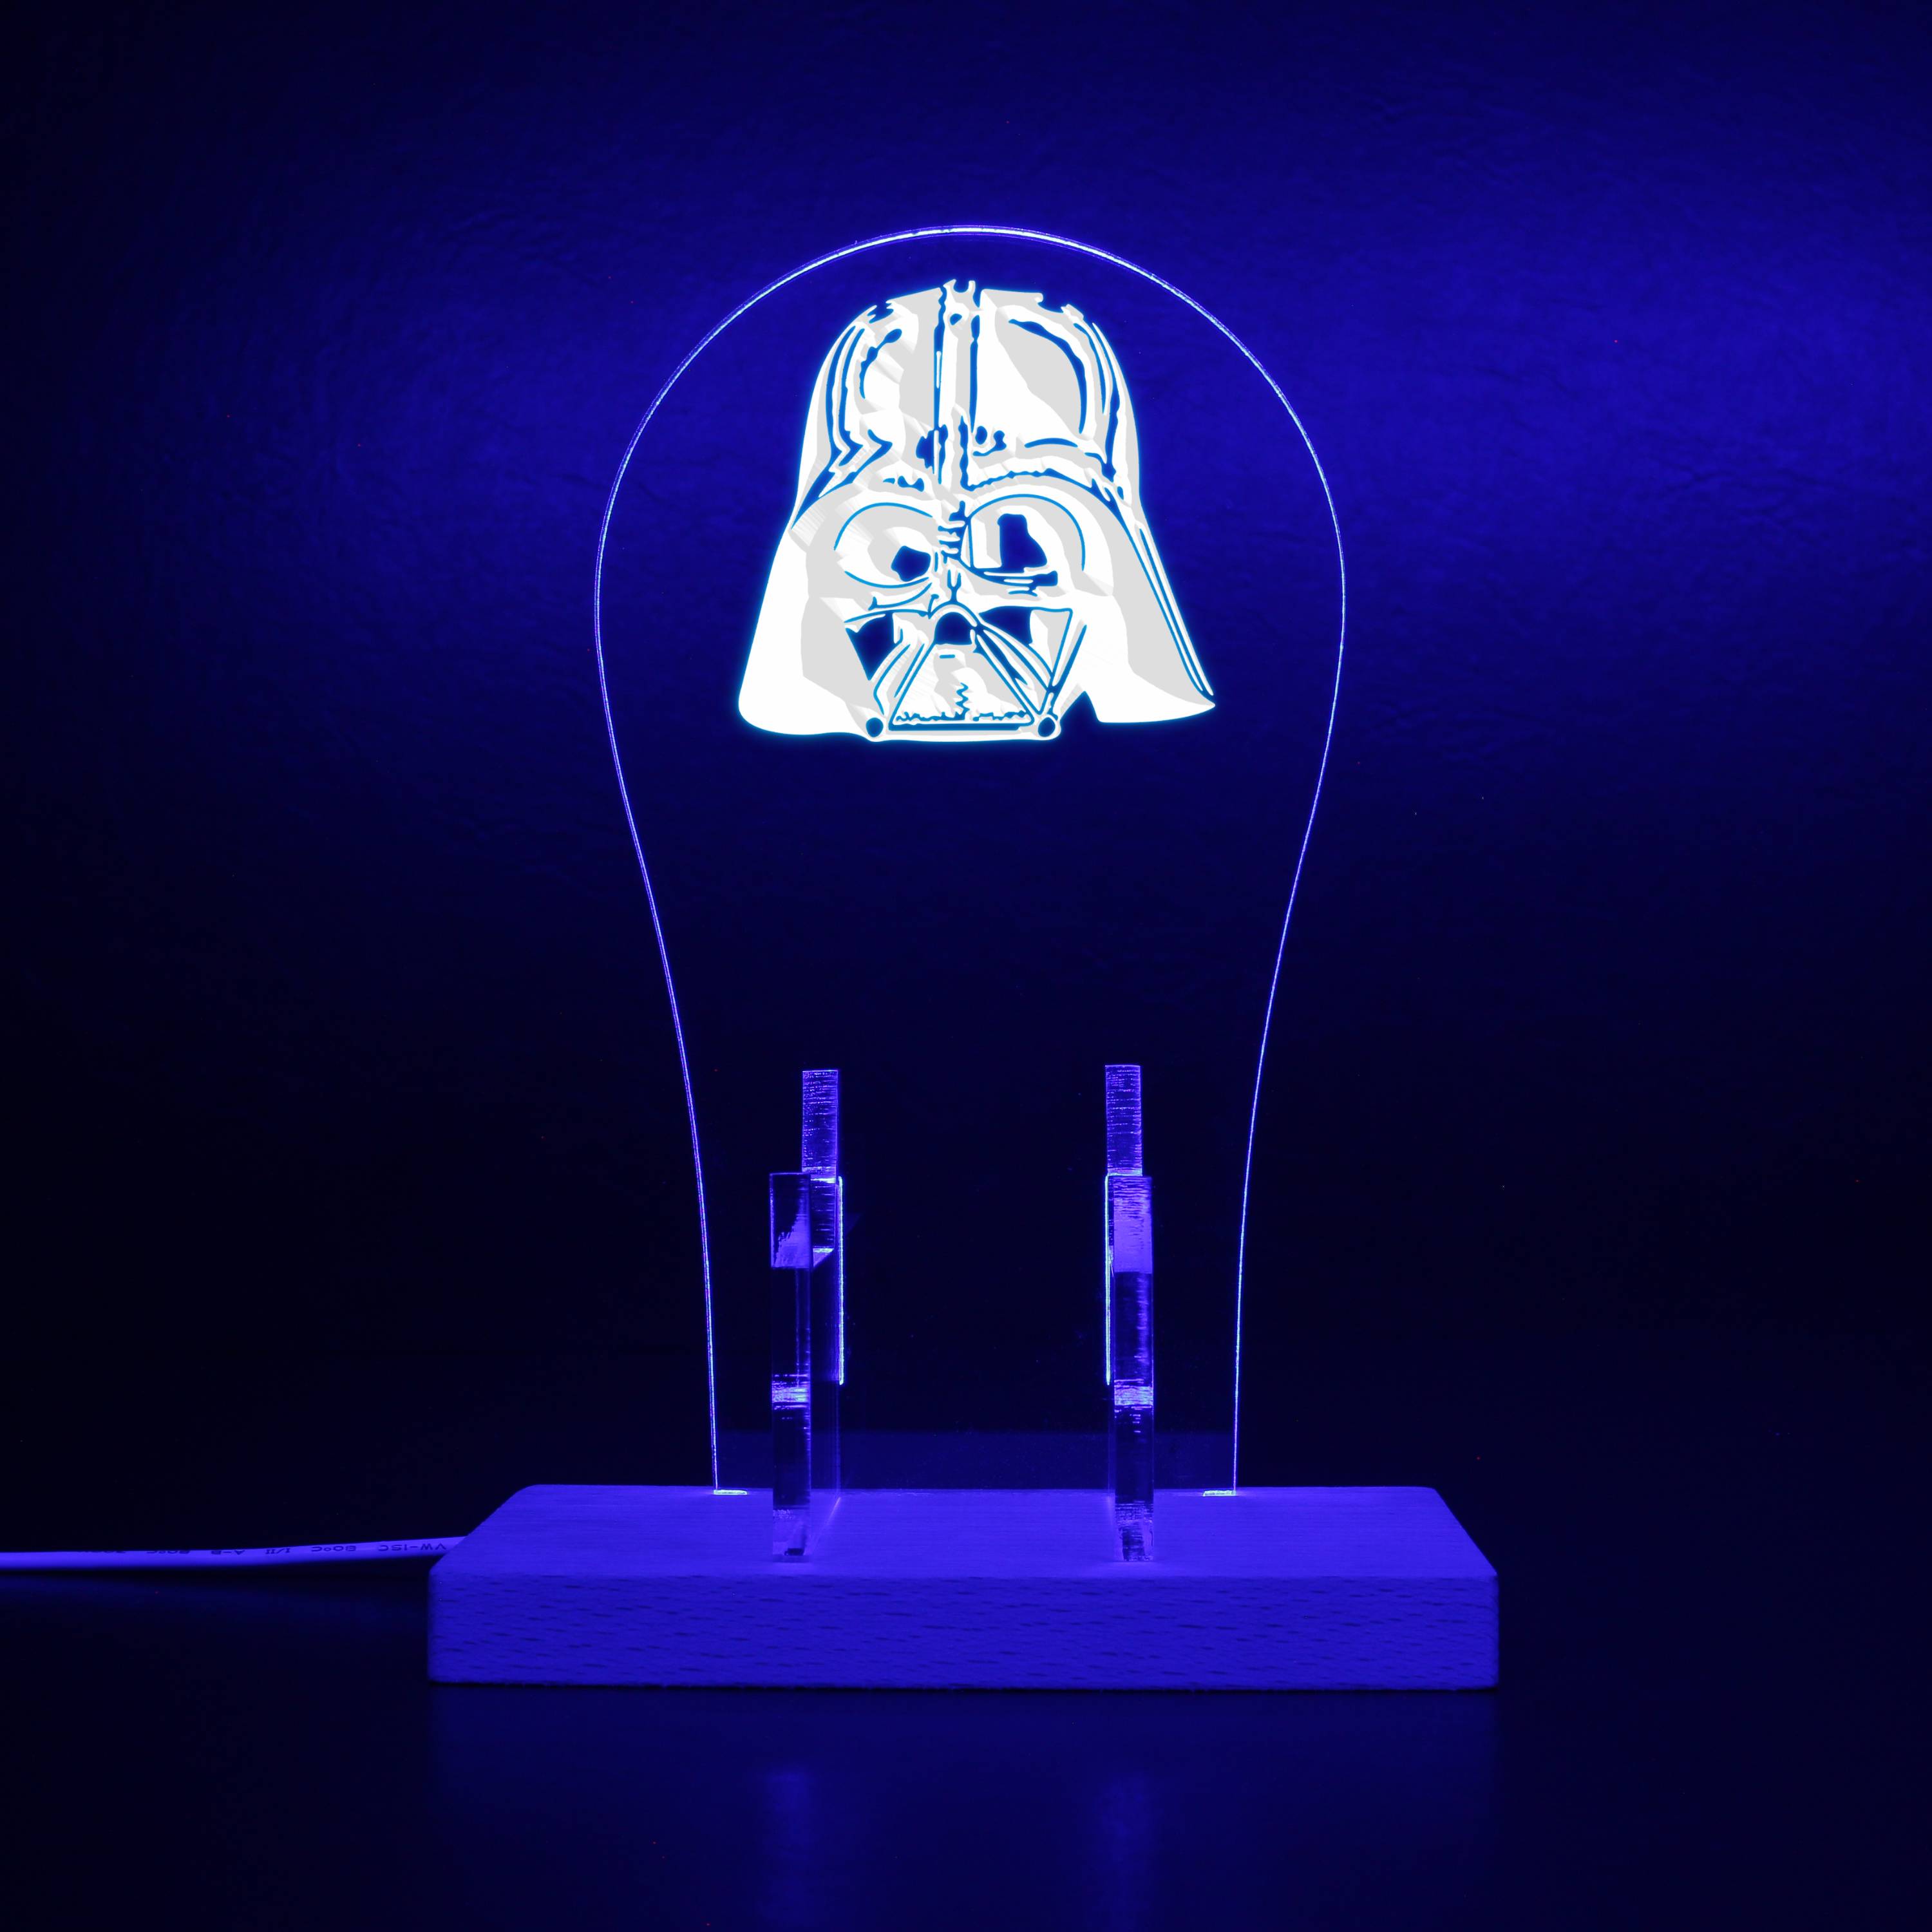 Star Wars Darth Vaders LED Gaming Headset Controller Stand